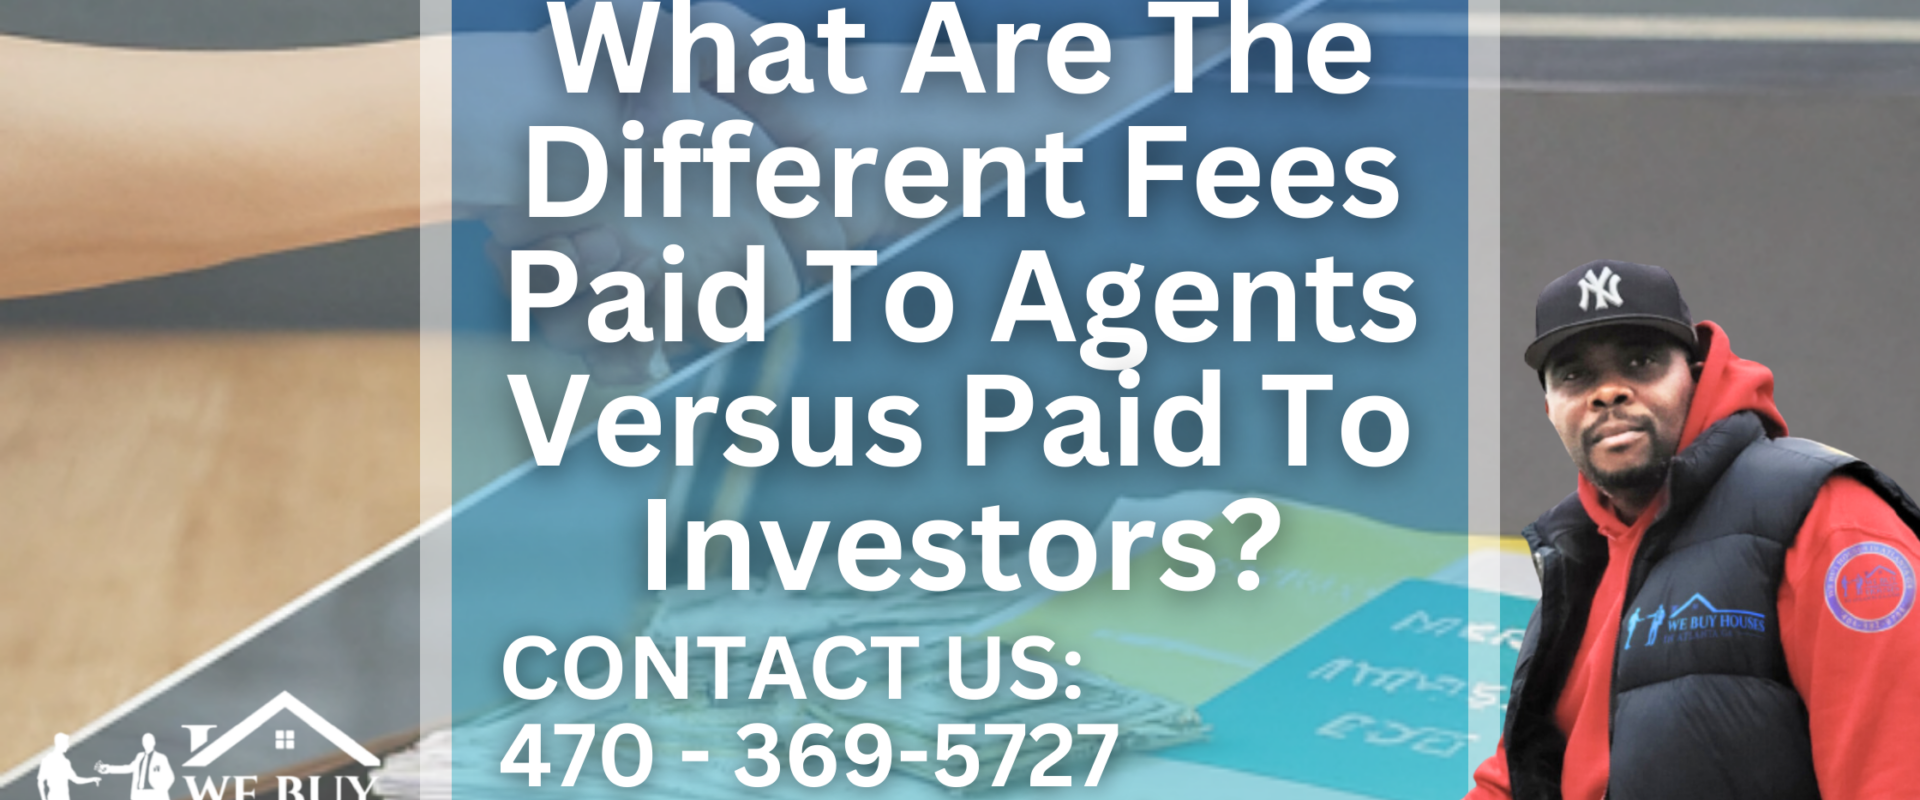 What Are The Different Fees Paid To Agents Versus Paid To Investors (1)